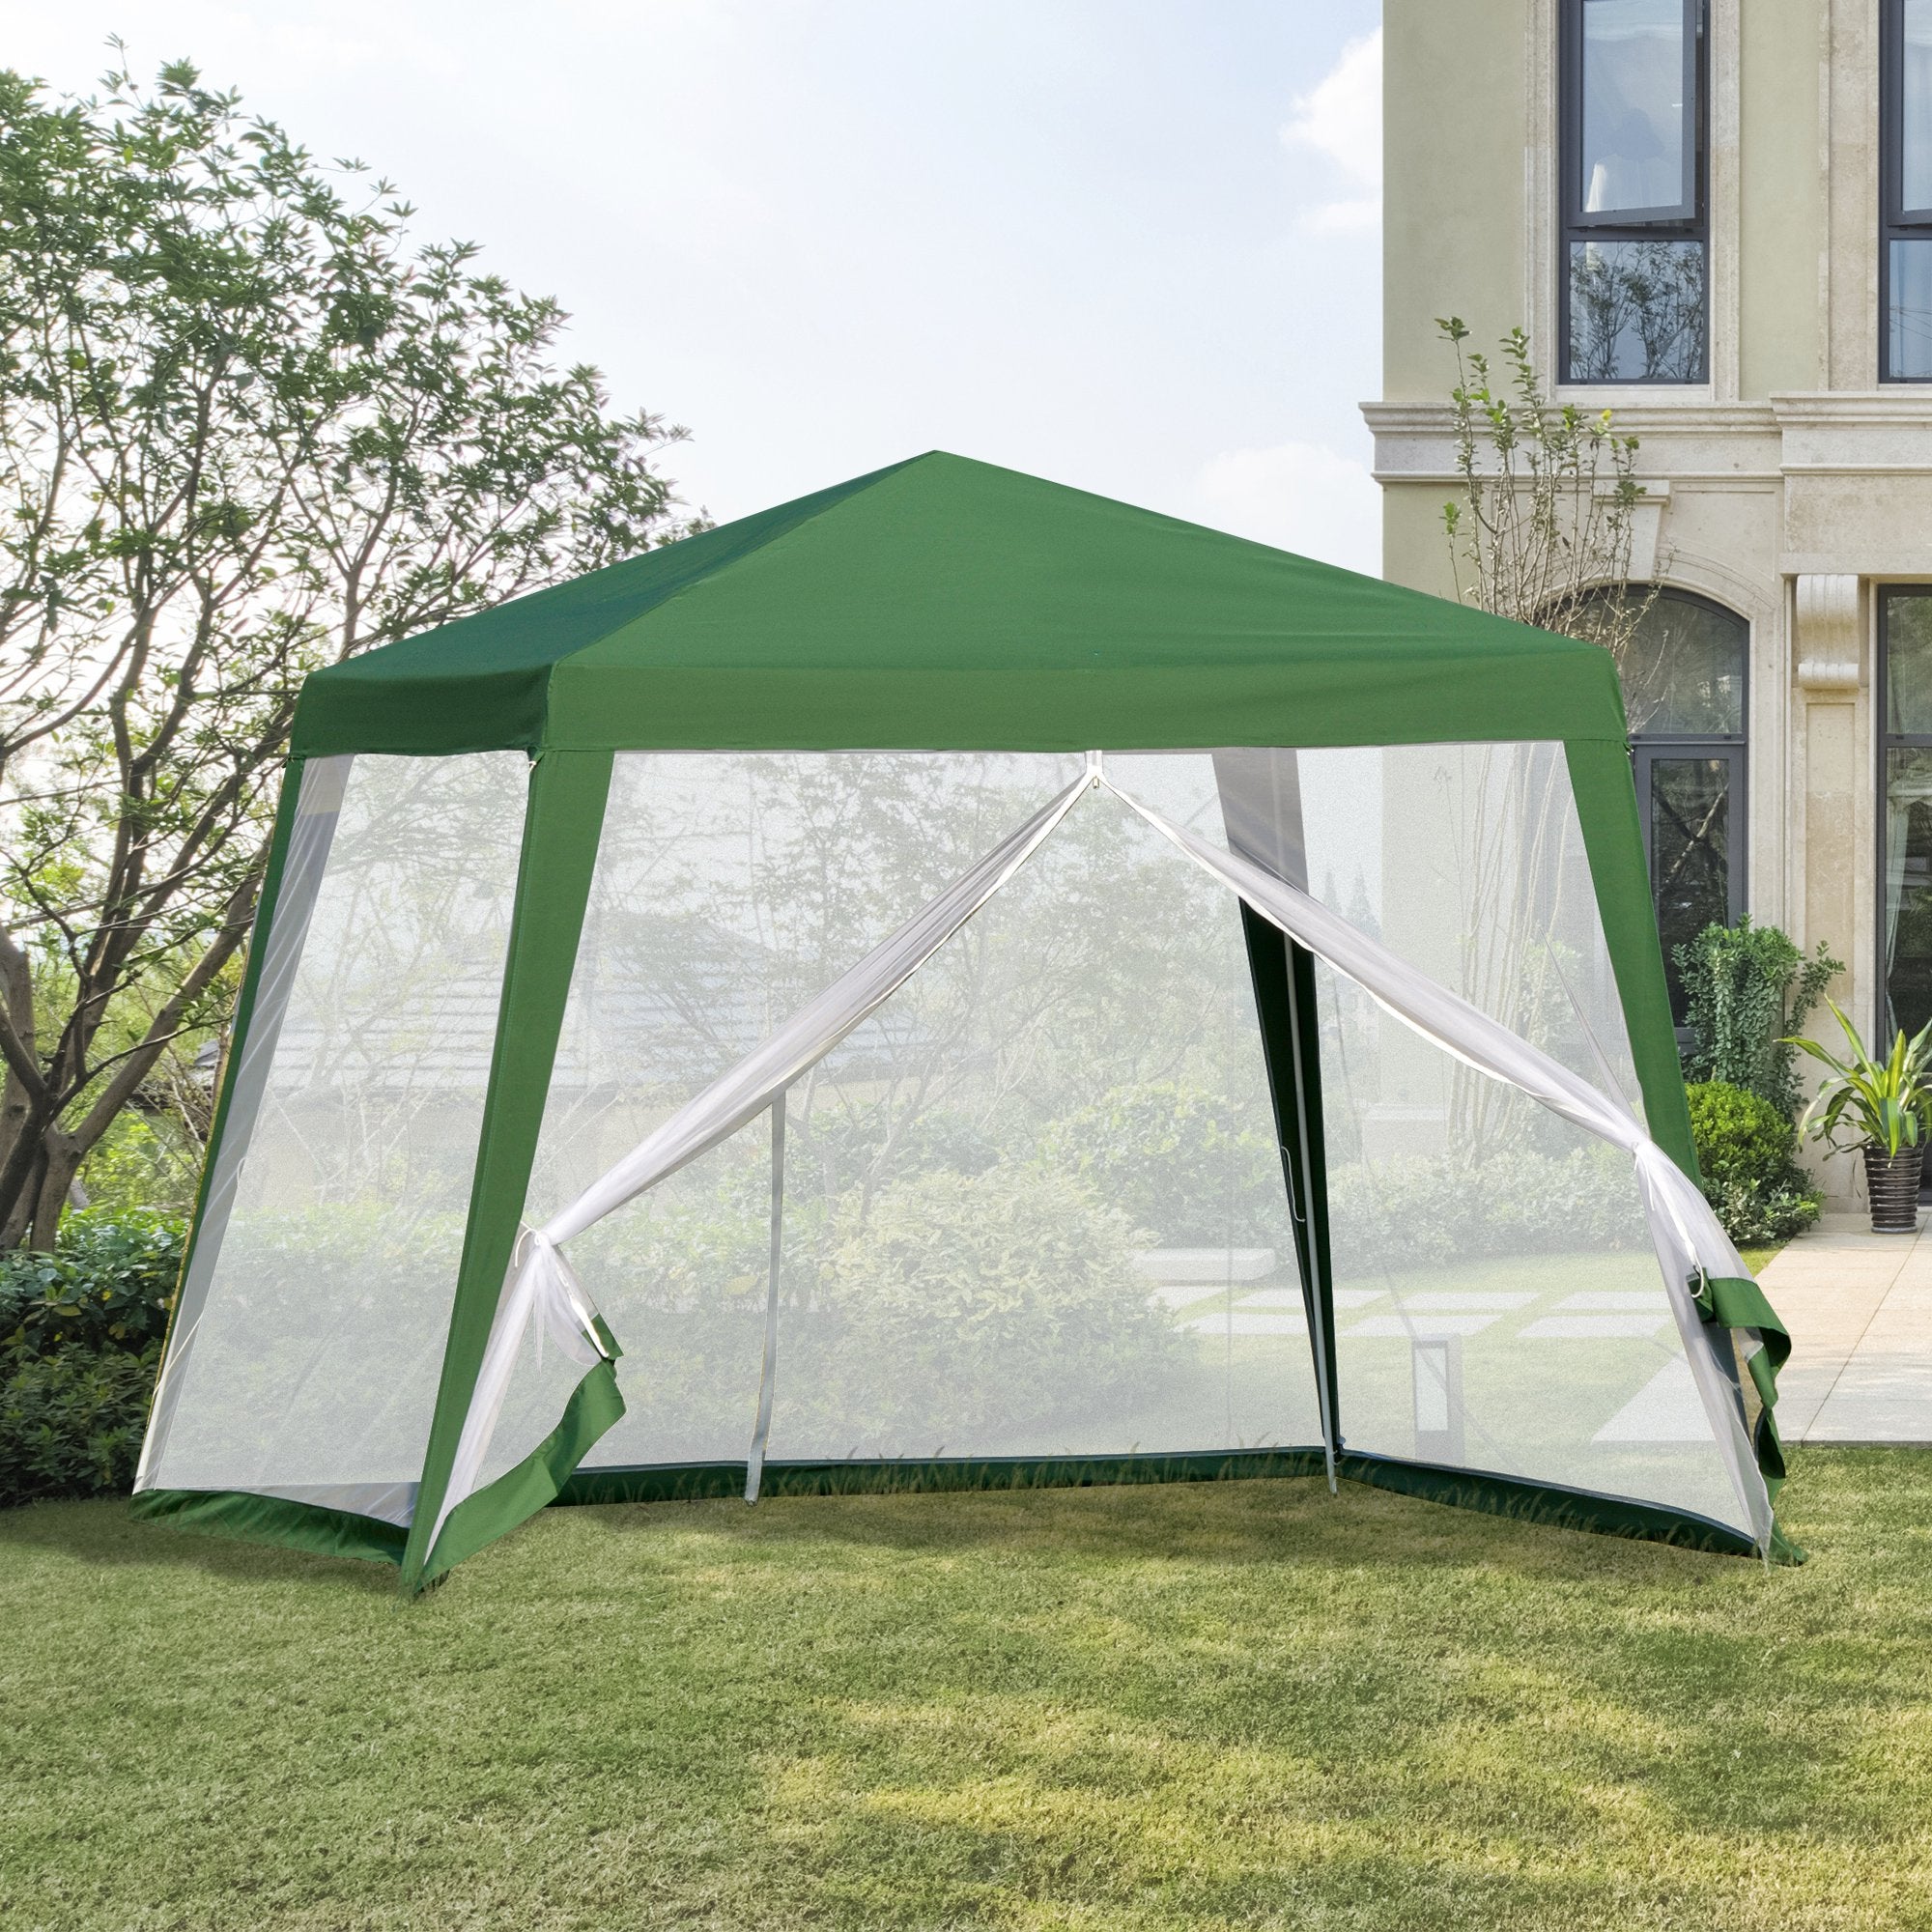 Nancy's Mount Vernon Garden Pavilion - Party Tent - With Mosquito Net - Polyester - Green - 300 x 300 cm